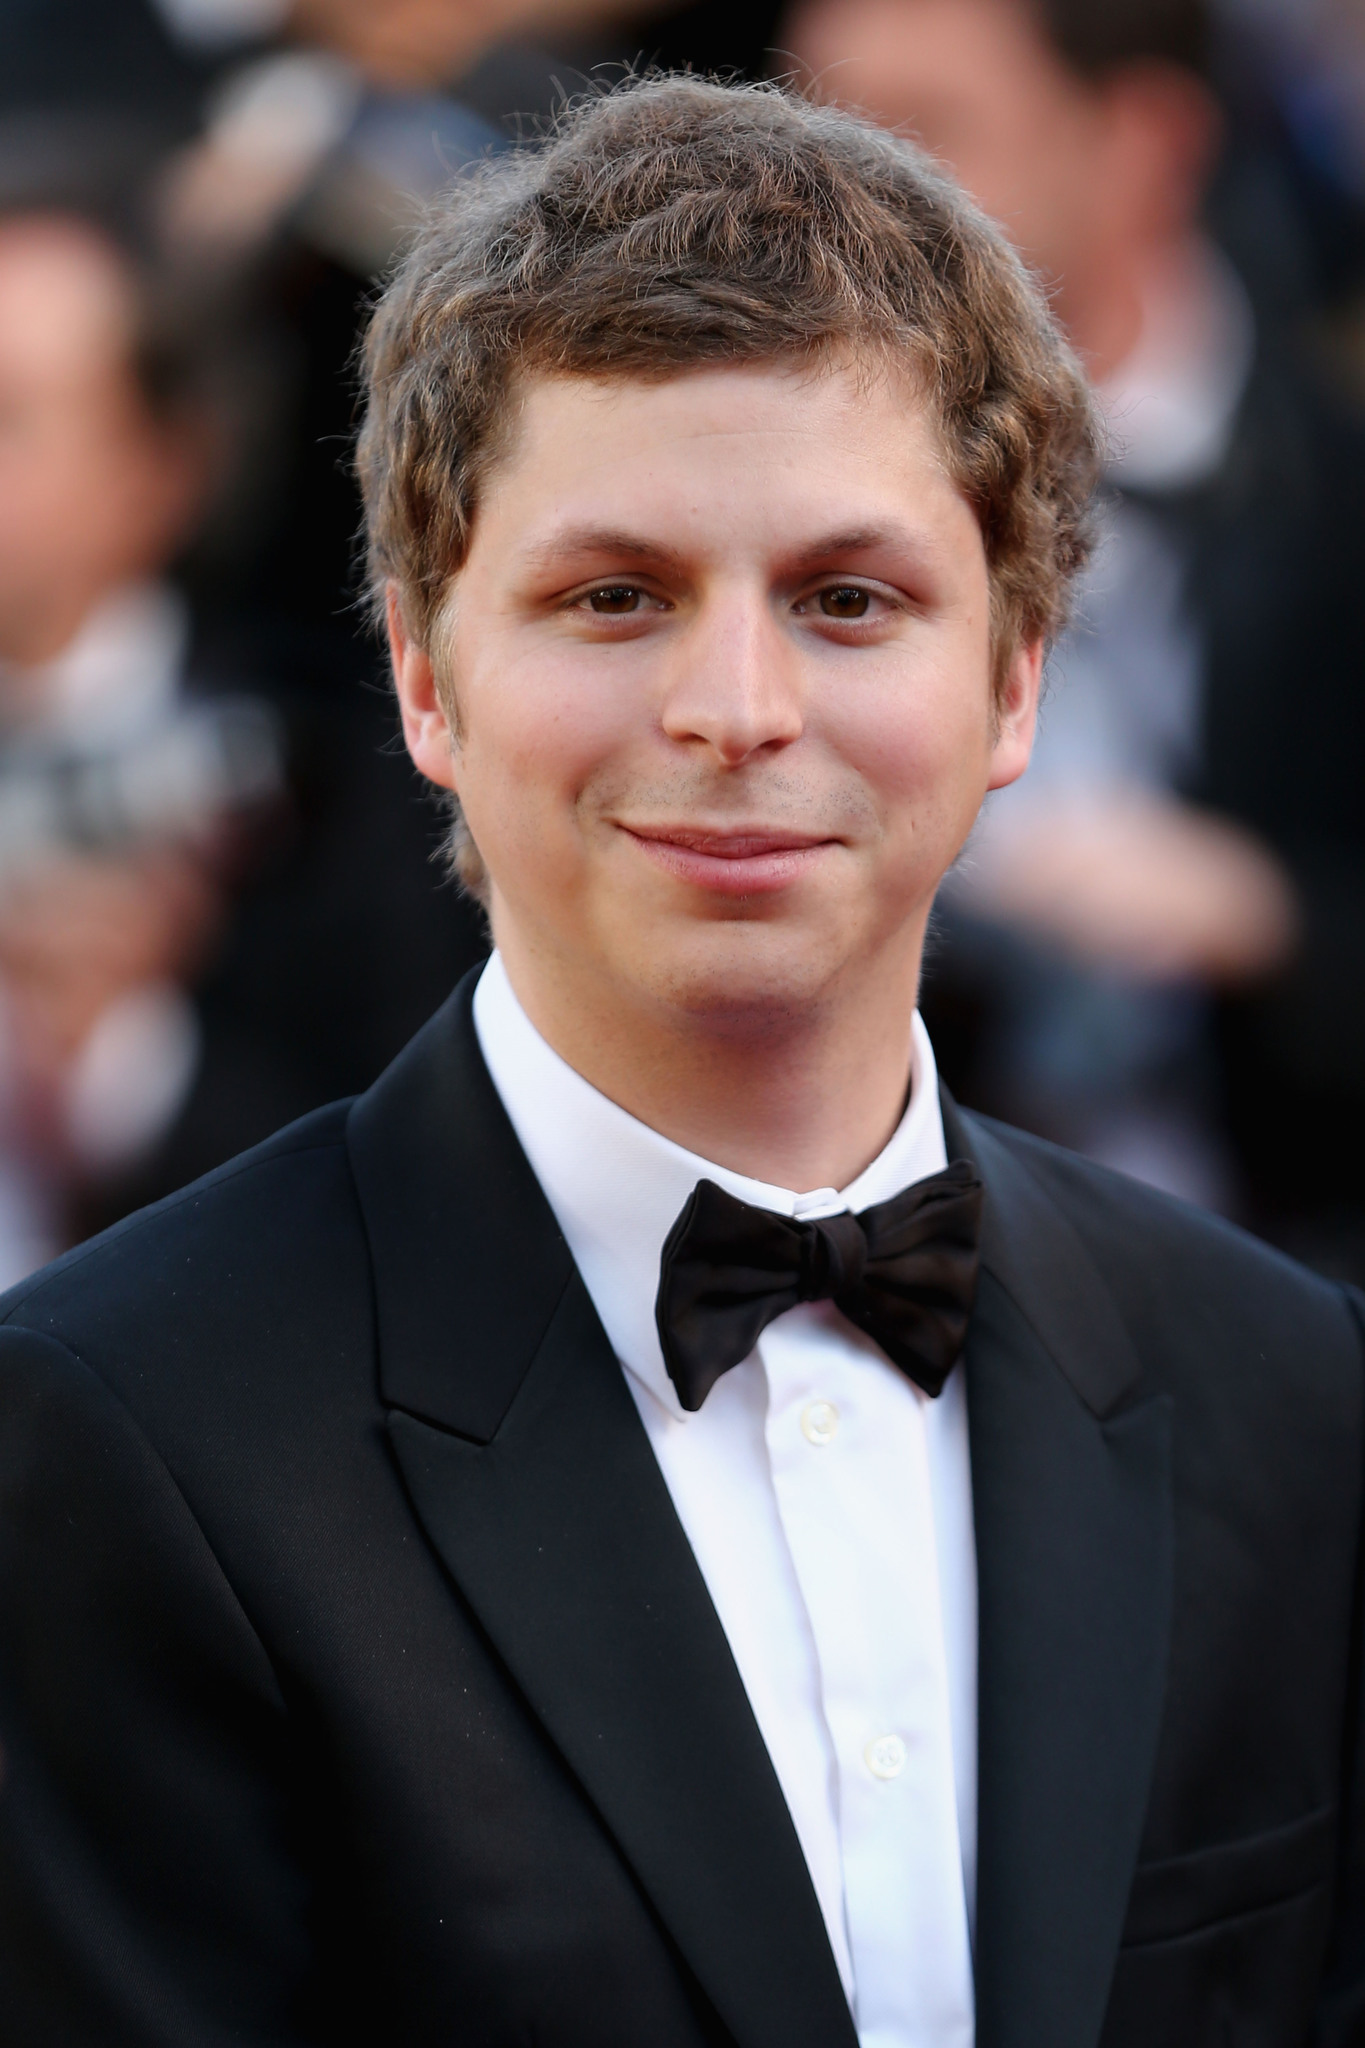 How tall is Michael Cera?